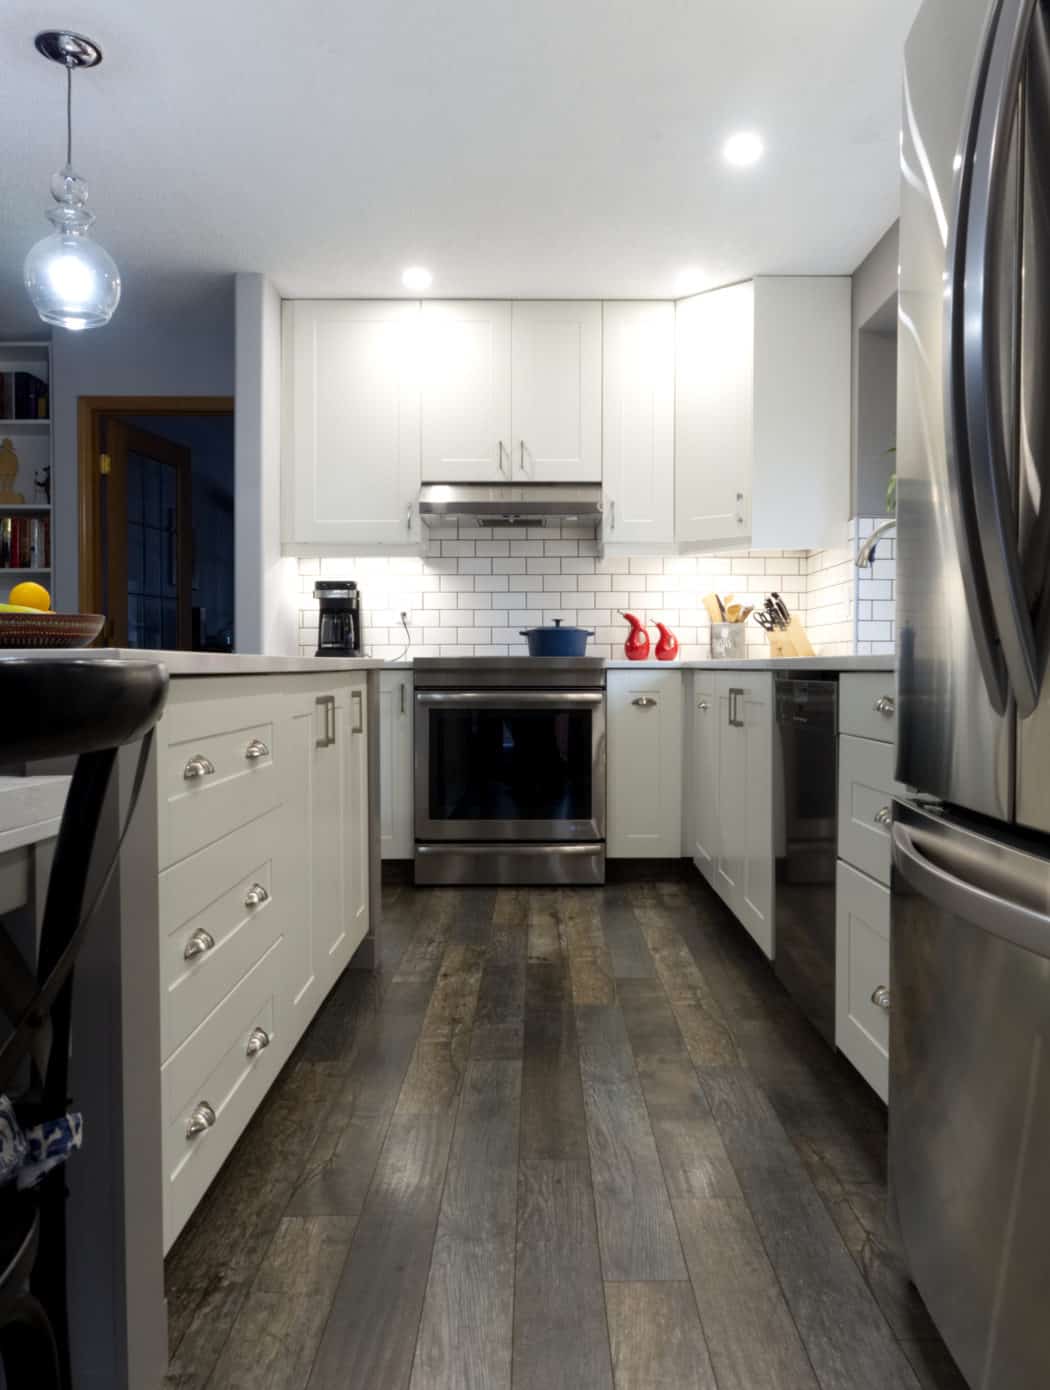 Ikea Kitchen Review Pros Cons And Overall Quality The Homestud